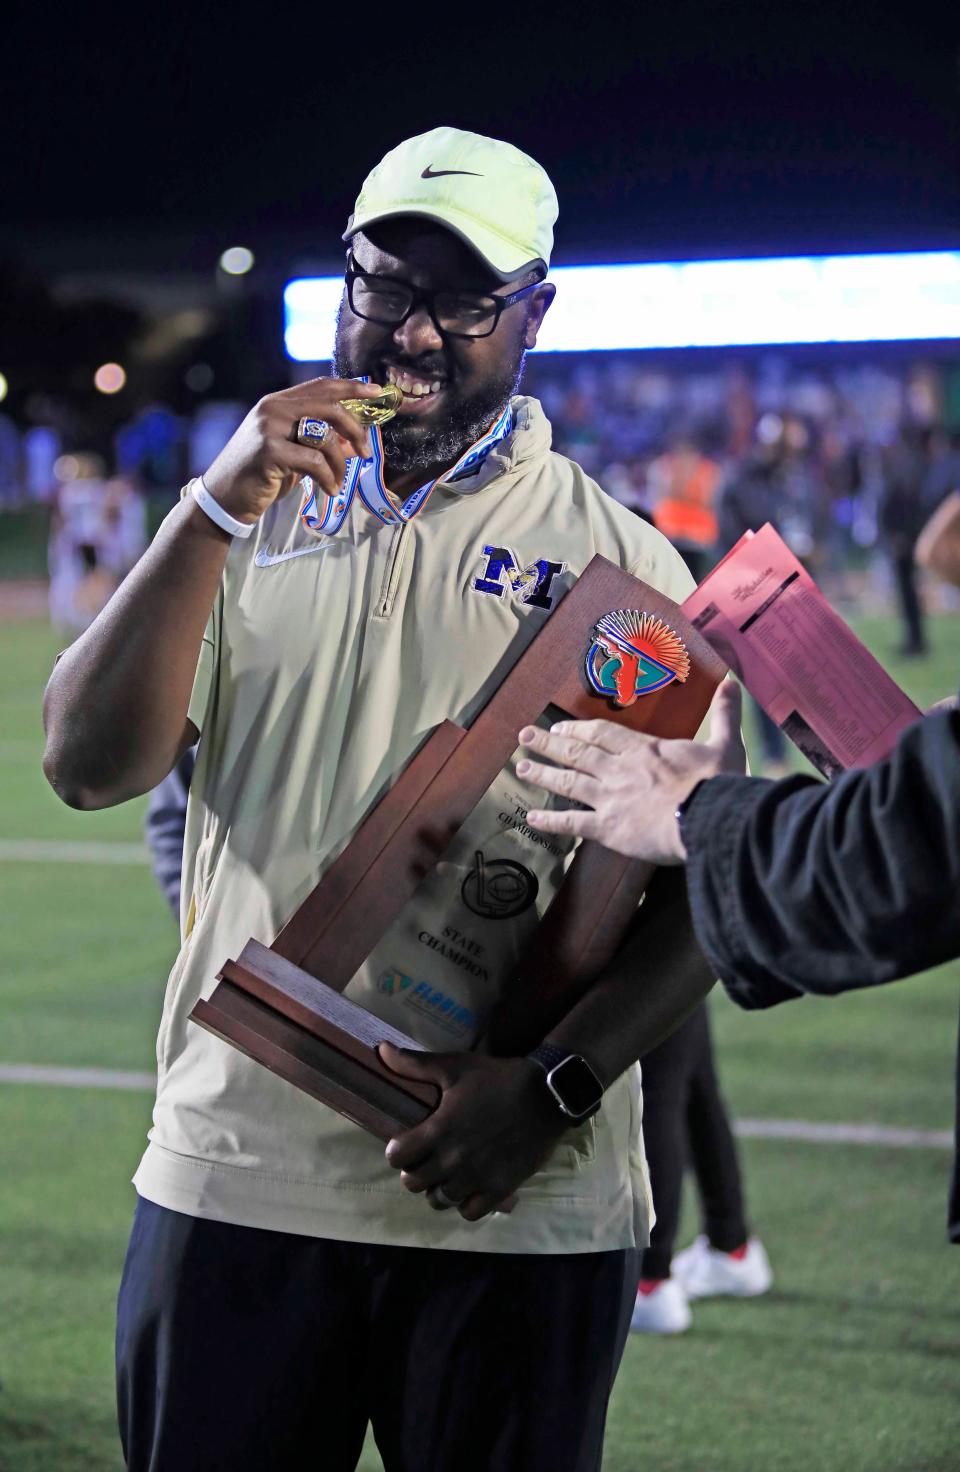 Mainland coach Travis Roland accepts the trophy on Dec. 7 after the Bucs claimed a 21-19 win over St. Augustine in the Class 3S state championship game in Tallahassee.